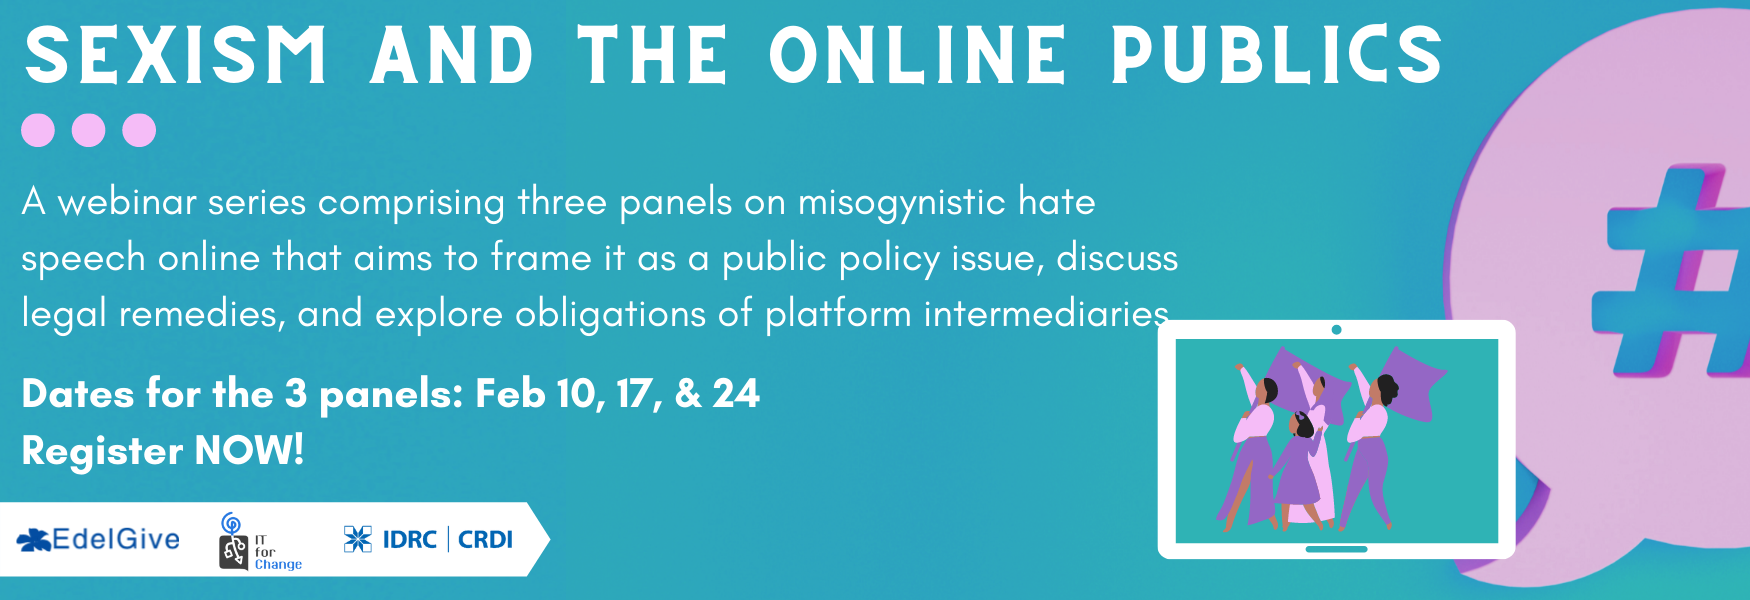 Sexism and the Online Publics: A Webinar Series